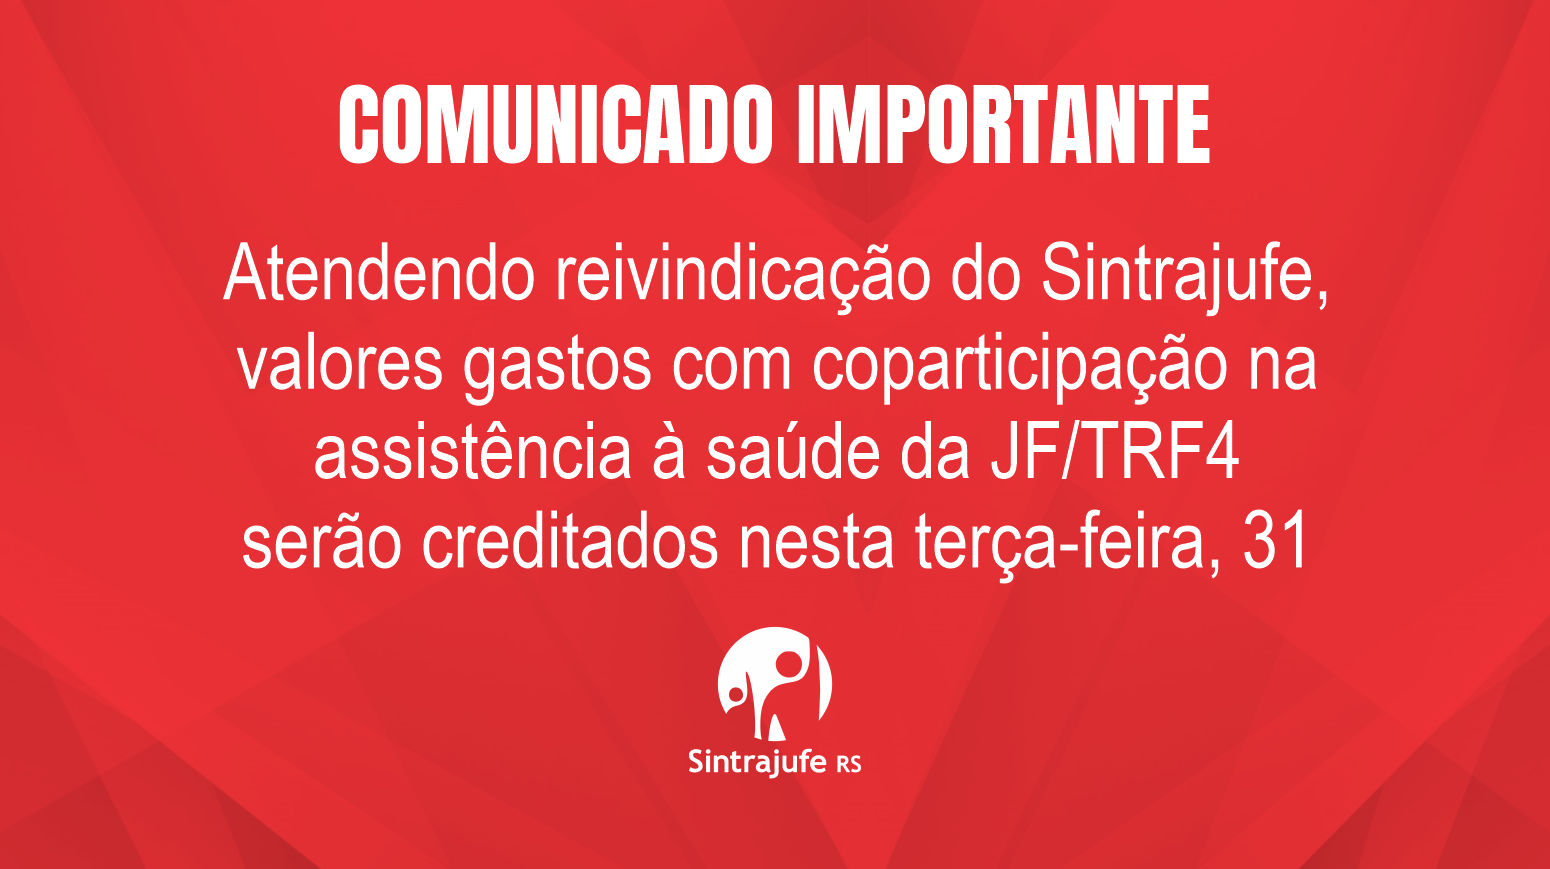 In response to a Sintrajufe/RS request, JF/TRF4 health care sharing expense amounts will be deposited this Tuesday, 31